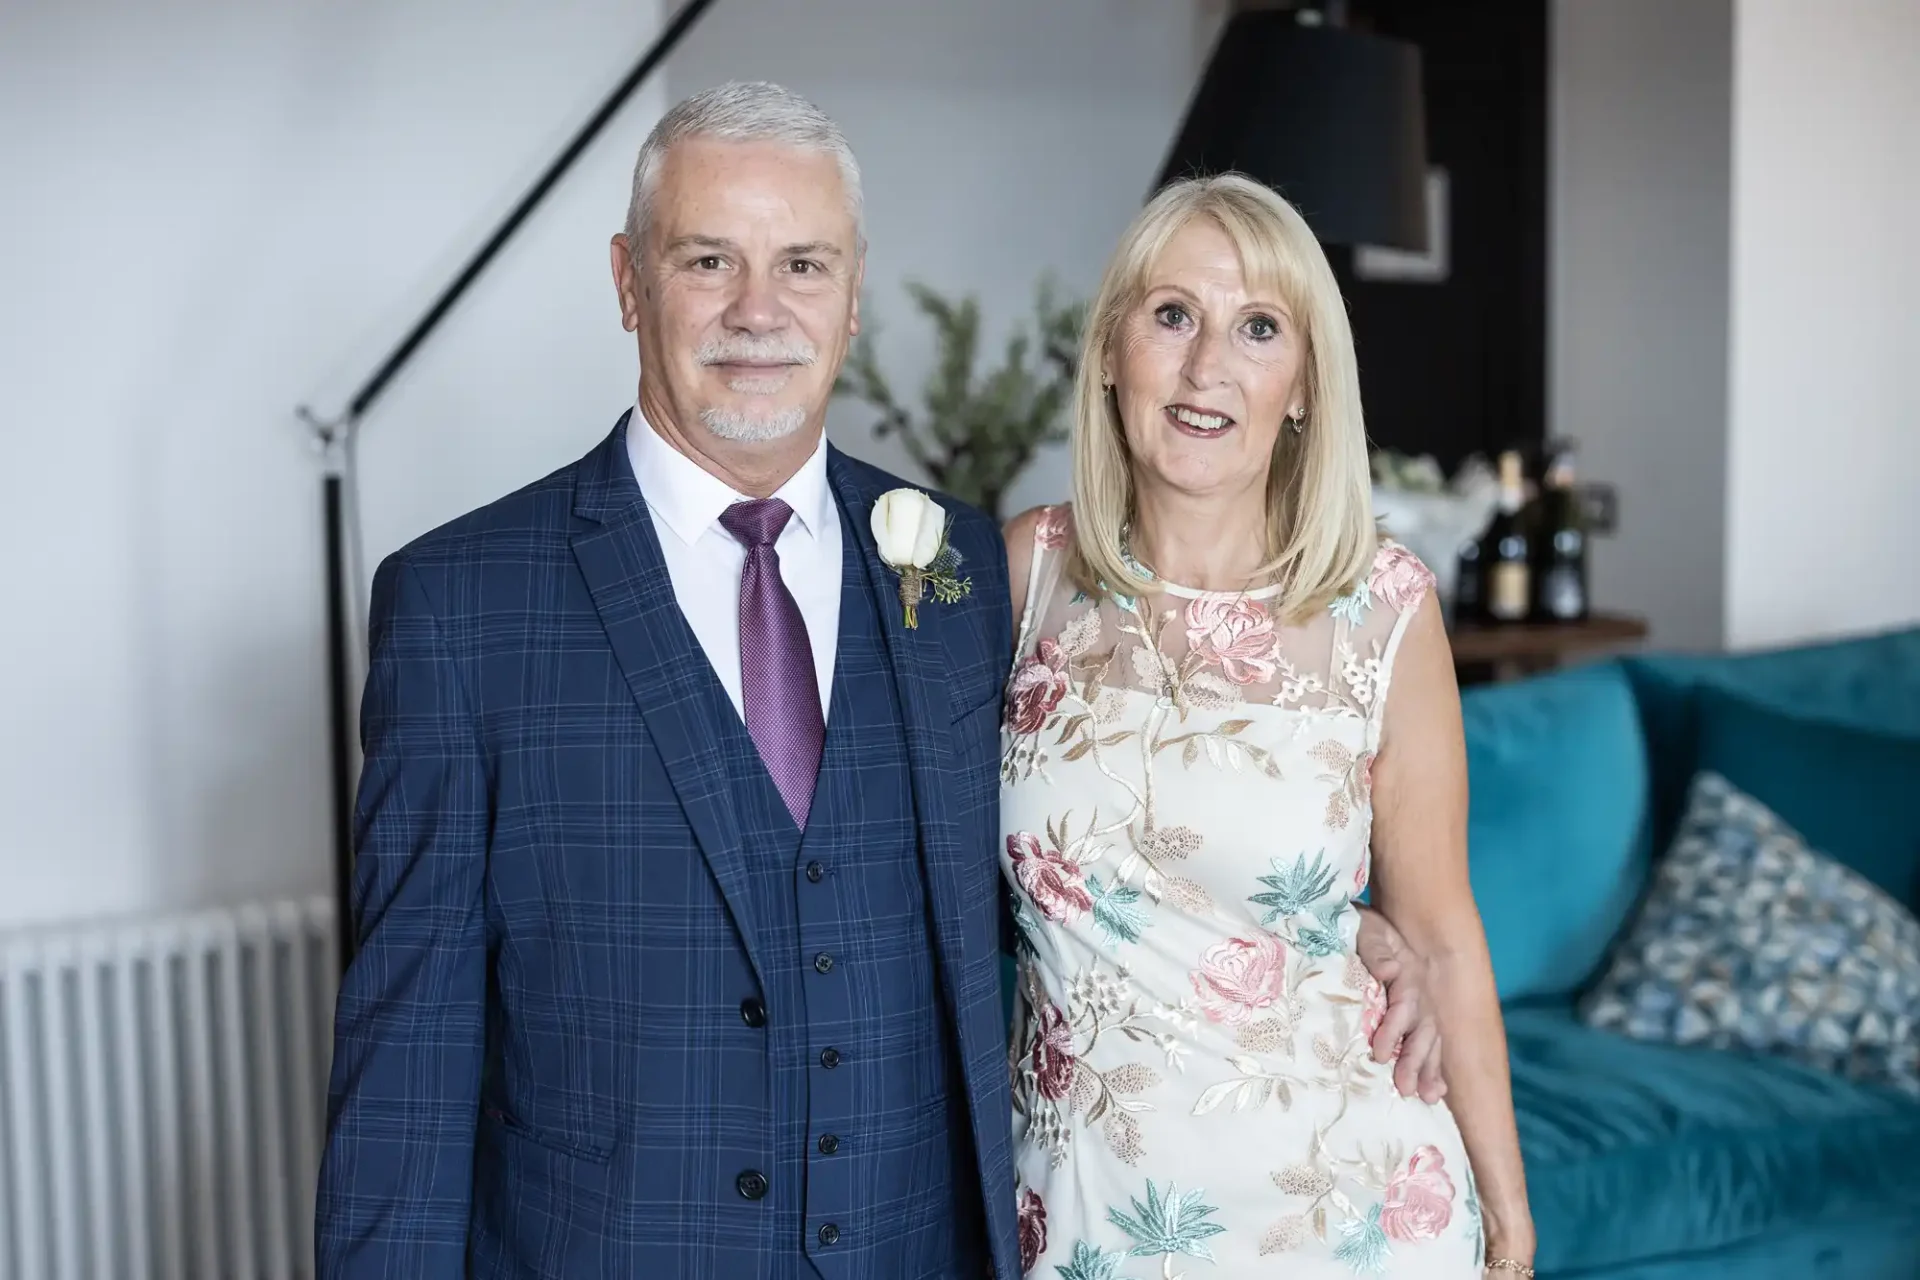 A mature couple dressed in formal attire—man in a blue checked suit and woman in a floral dress—smiling in a room with modern decor.